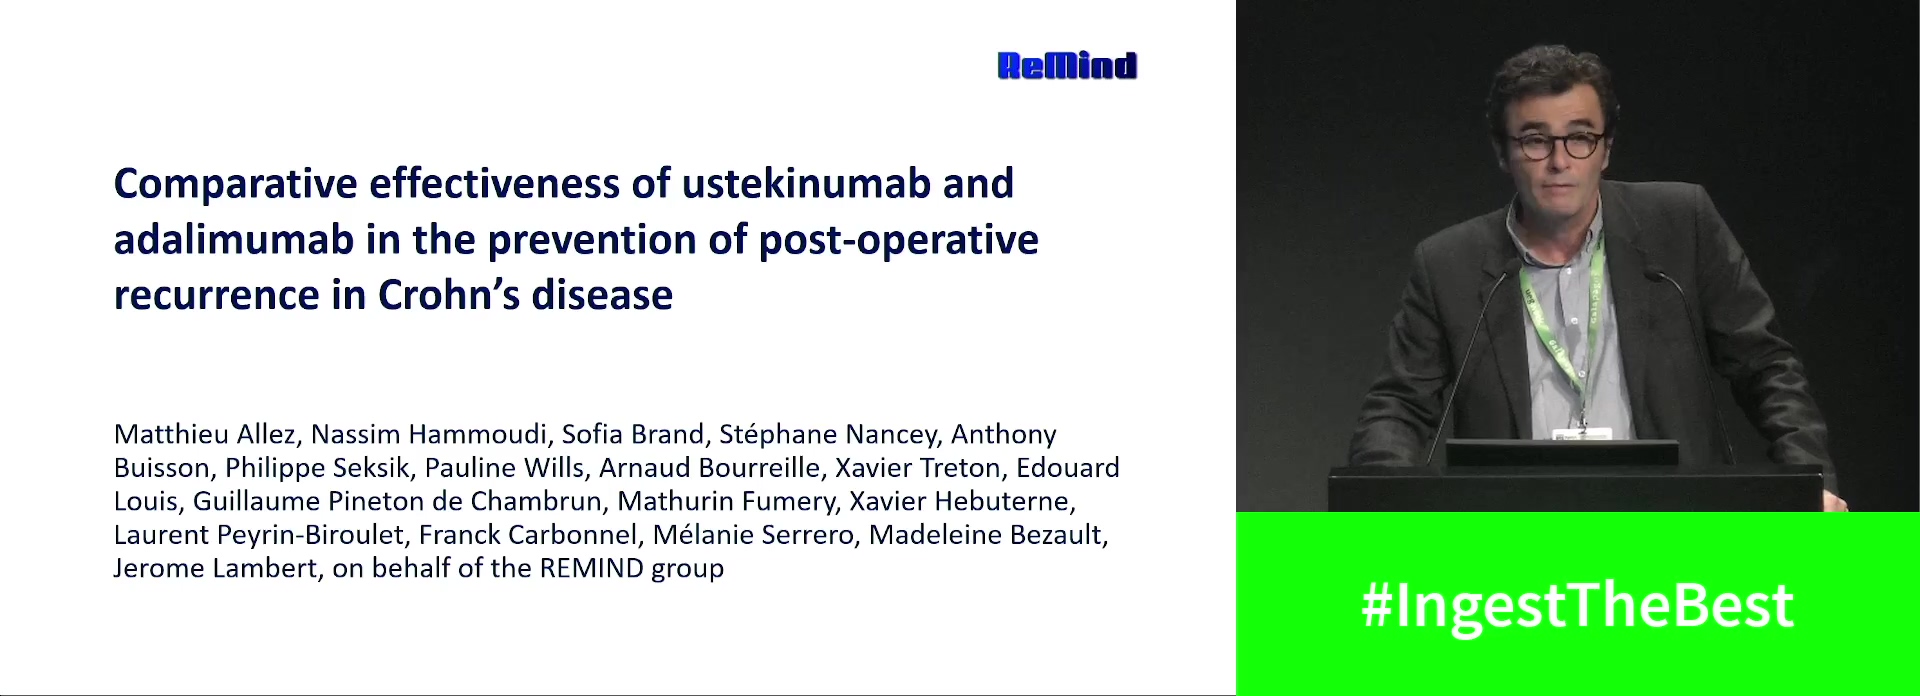 COMPARATIVE EFFECTIVENESS OF USTEKINUMAB AND ADALIMUMAB IN THE PREVENTION OF POST-OPERATIVE RECURRENCE IN CROHN’S DISEASE